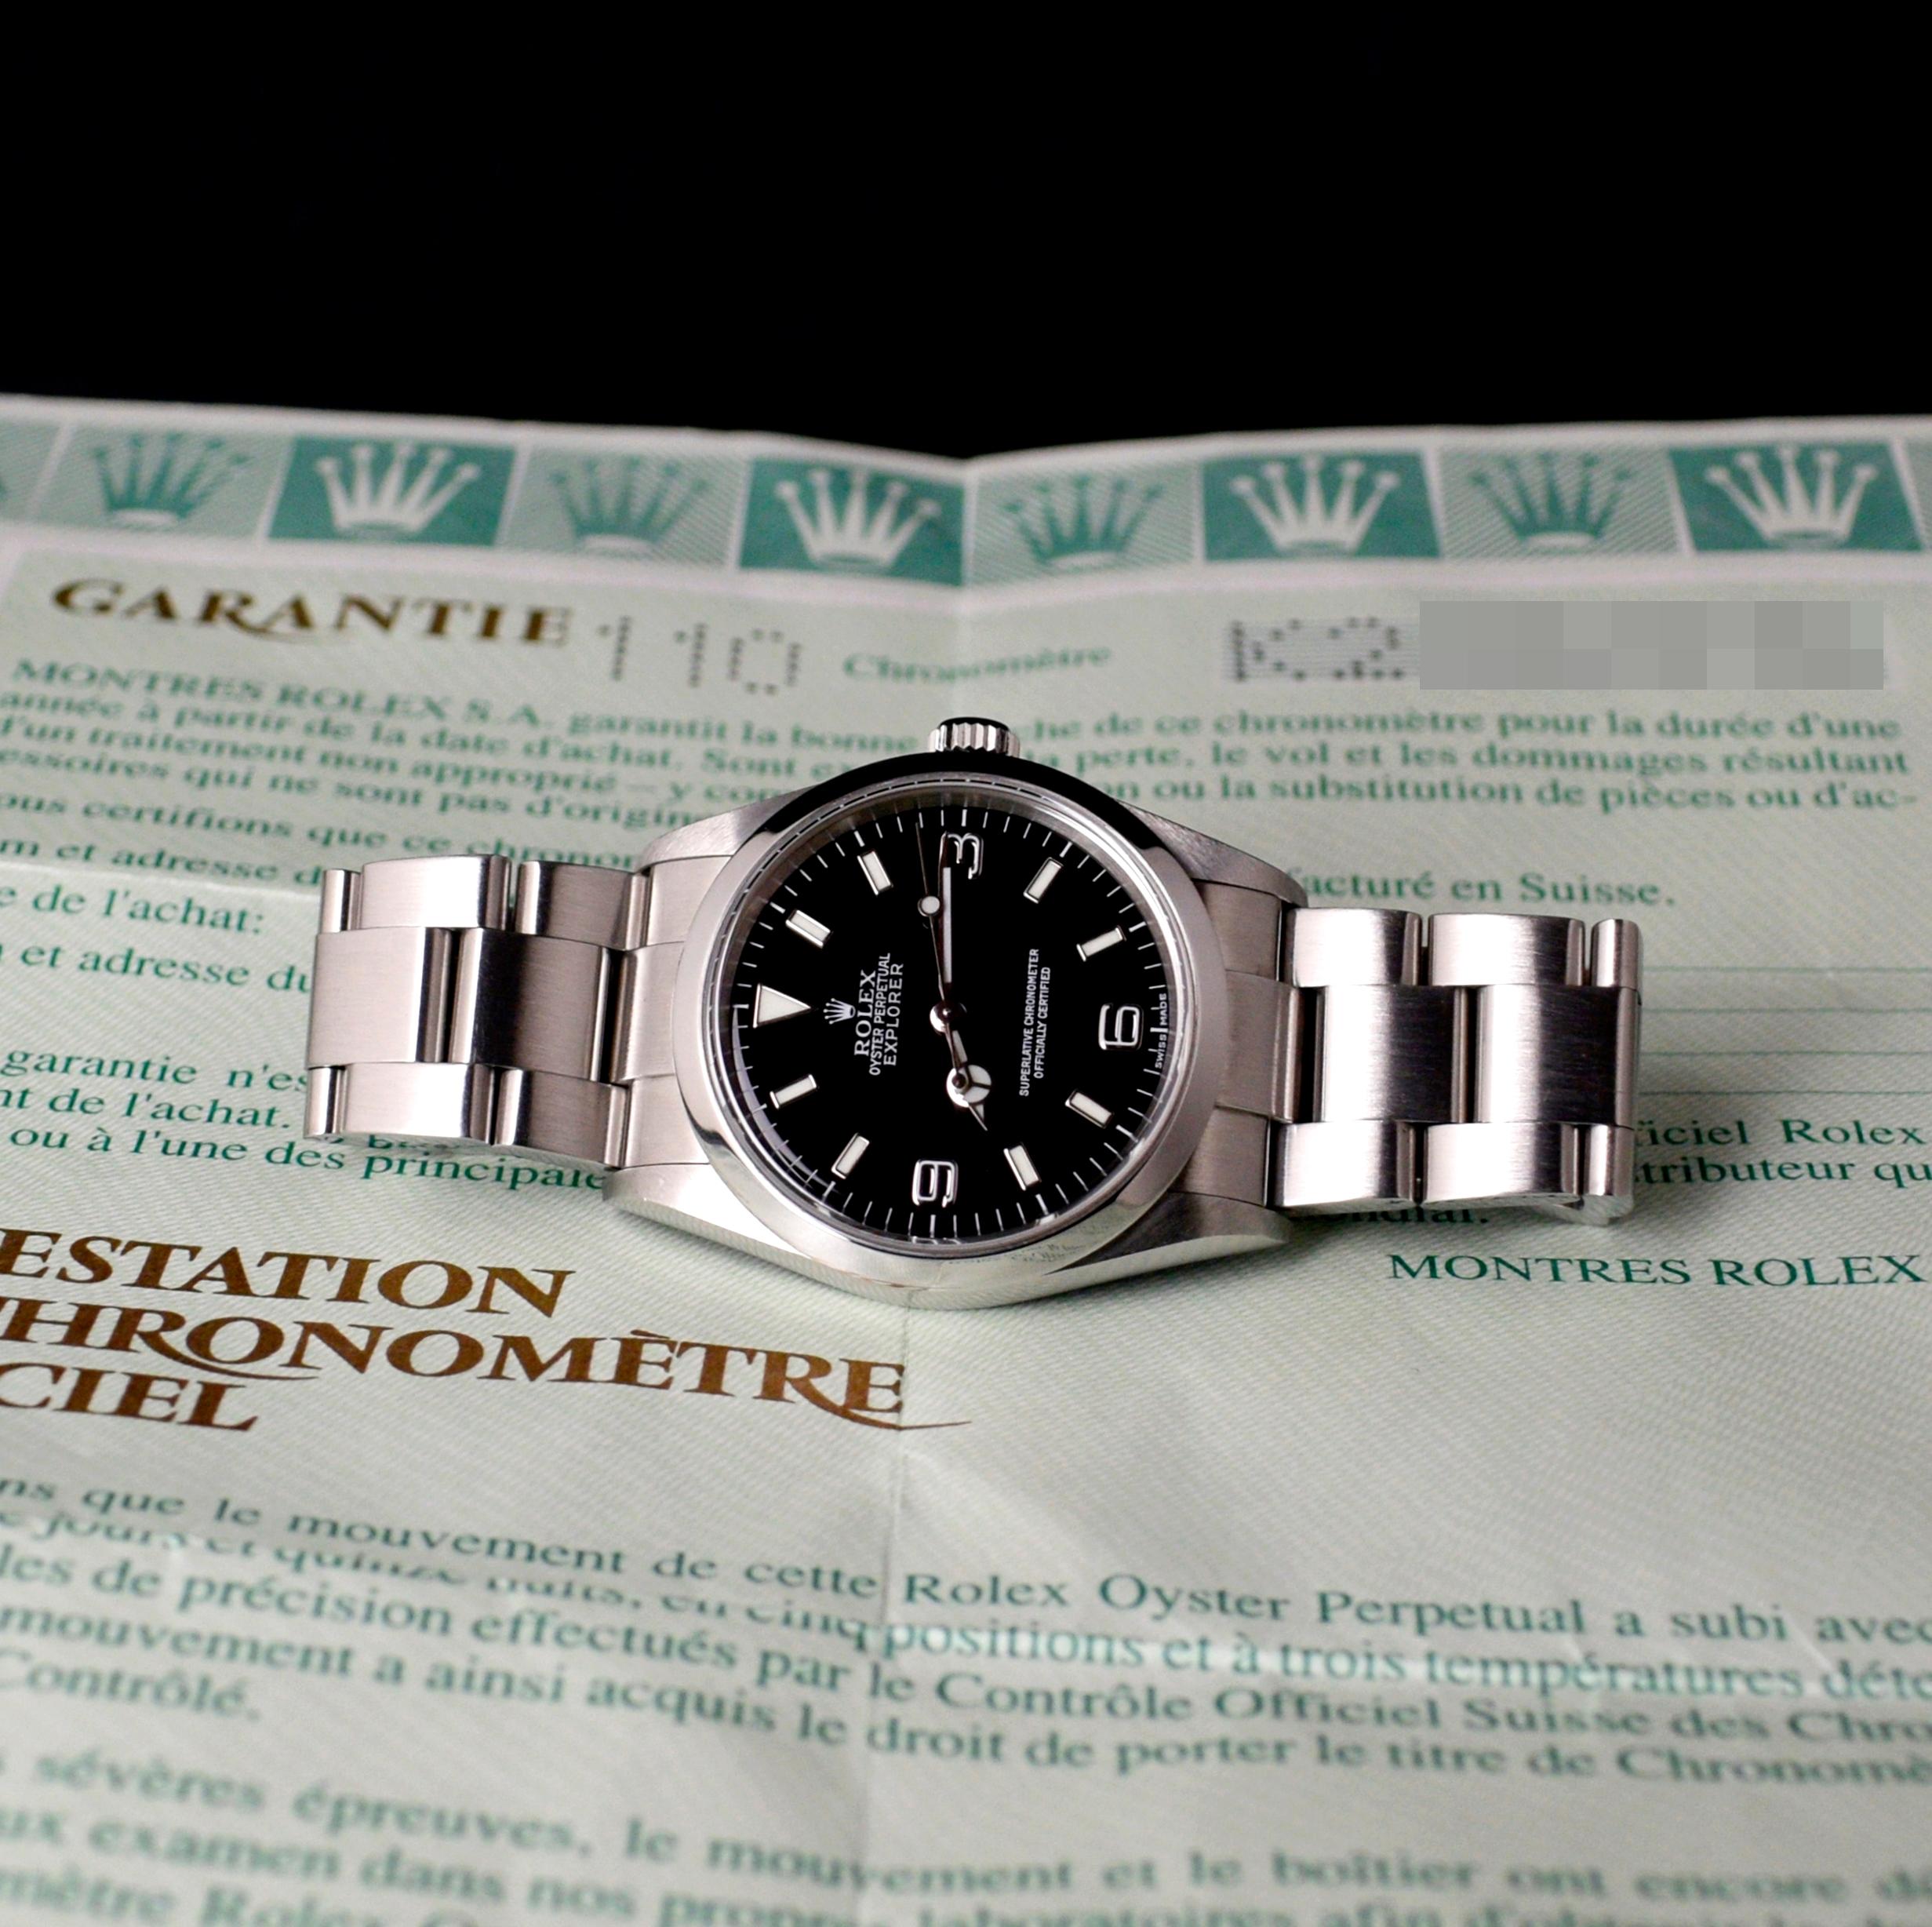 Brand: Rolex
Model: 114270
Year: 2001
Serial number: K2xxxxx
Reference: C03541

Case: Shows sign of wear with slight polish from previous; inner case back stamped 2080

Dial: Excellent Condition Black Dial 

Bracelet: 78690 Oyster Bracelet with 11